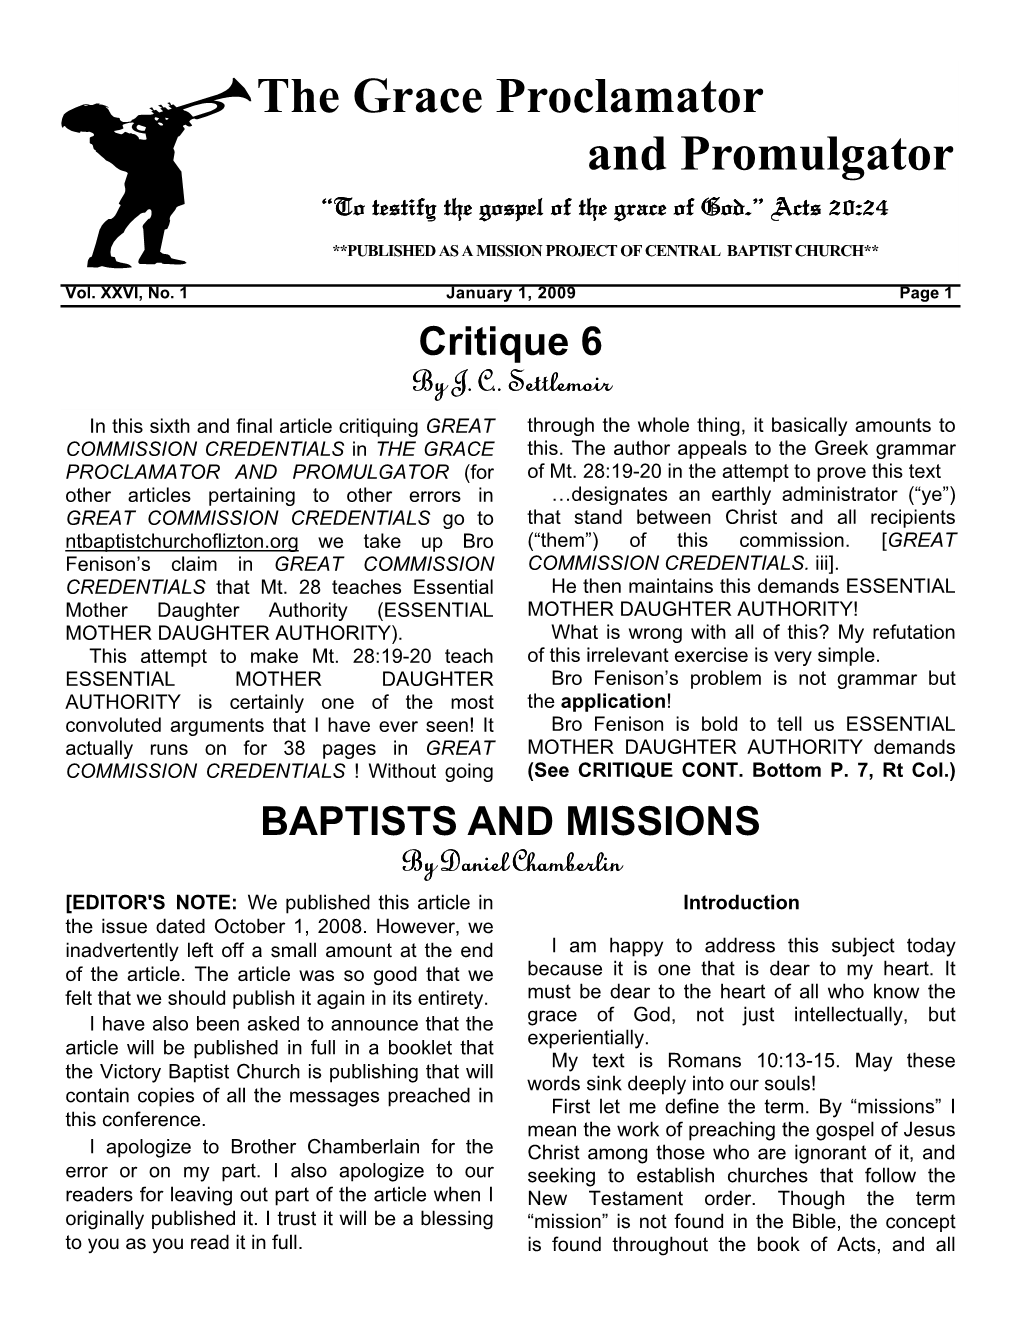 The Grace Proclamator and Promulgator “To Testify the Gospel of the Grace of God.” Acts 20:24